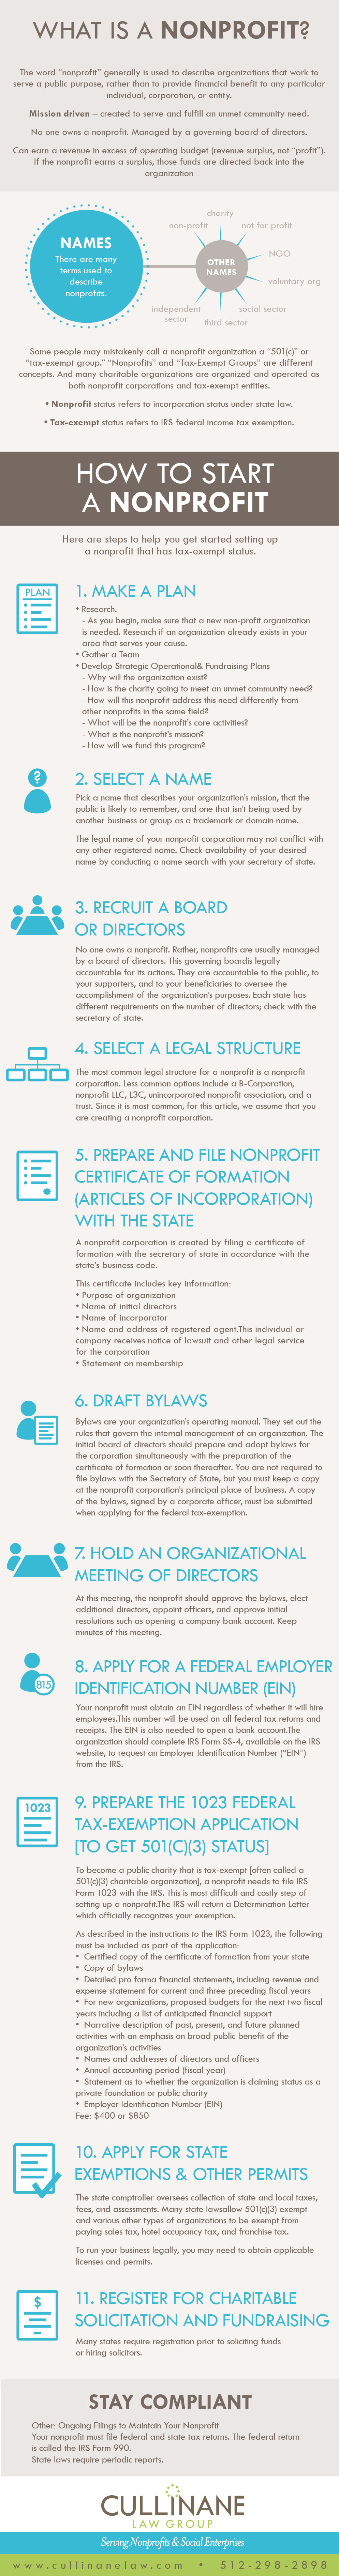 How To Set Up A Non Profit With 501 C 3 Status